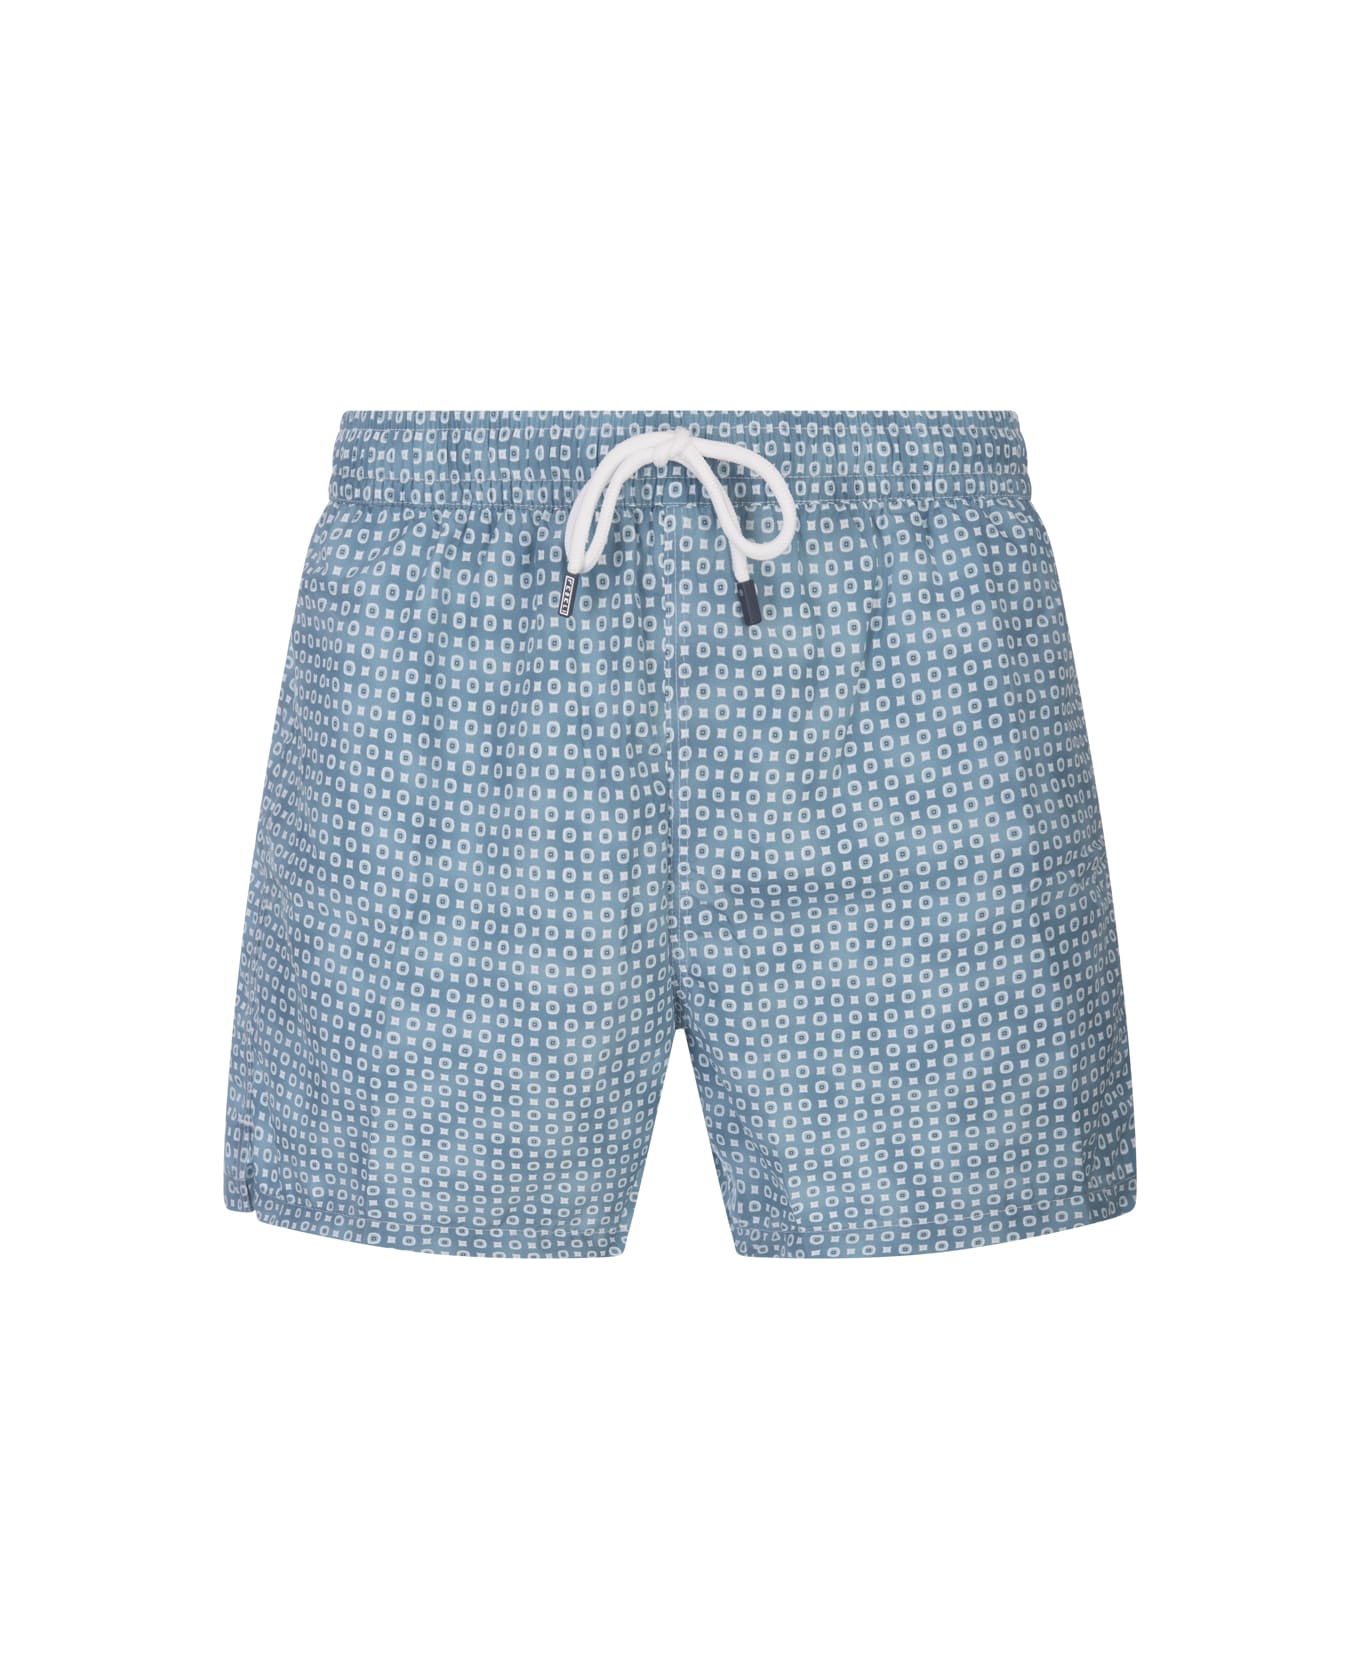 Fedeli Teal Blue Swim Shorts With Micro Pattern - Blue